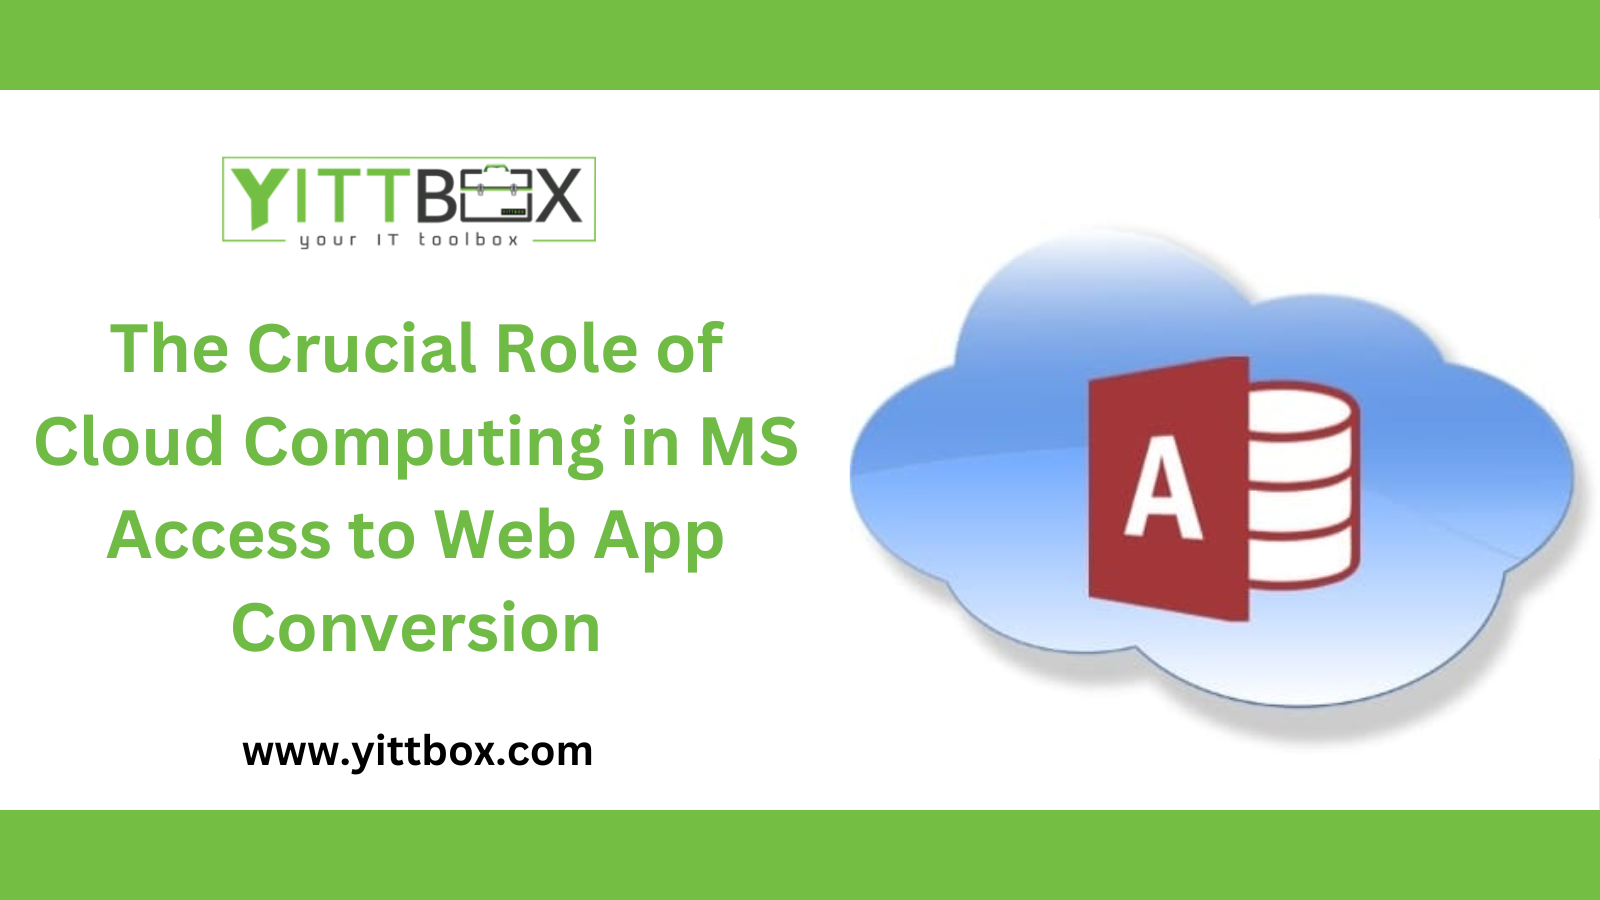 Unleashing Potential: The Crucial Role of Cloud Computing in MS Access to Web App Conversion